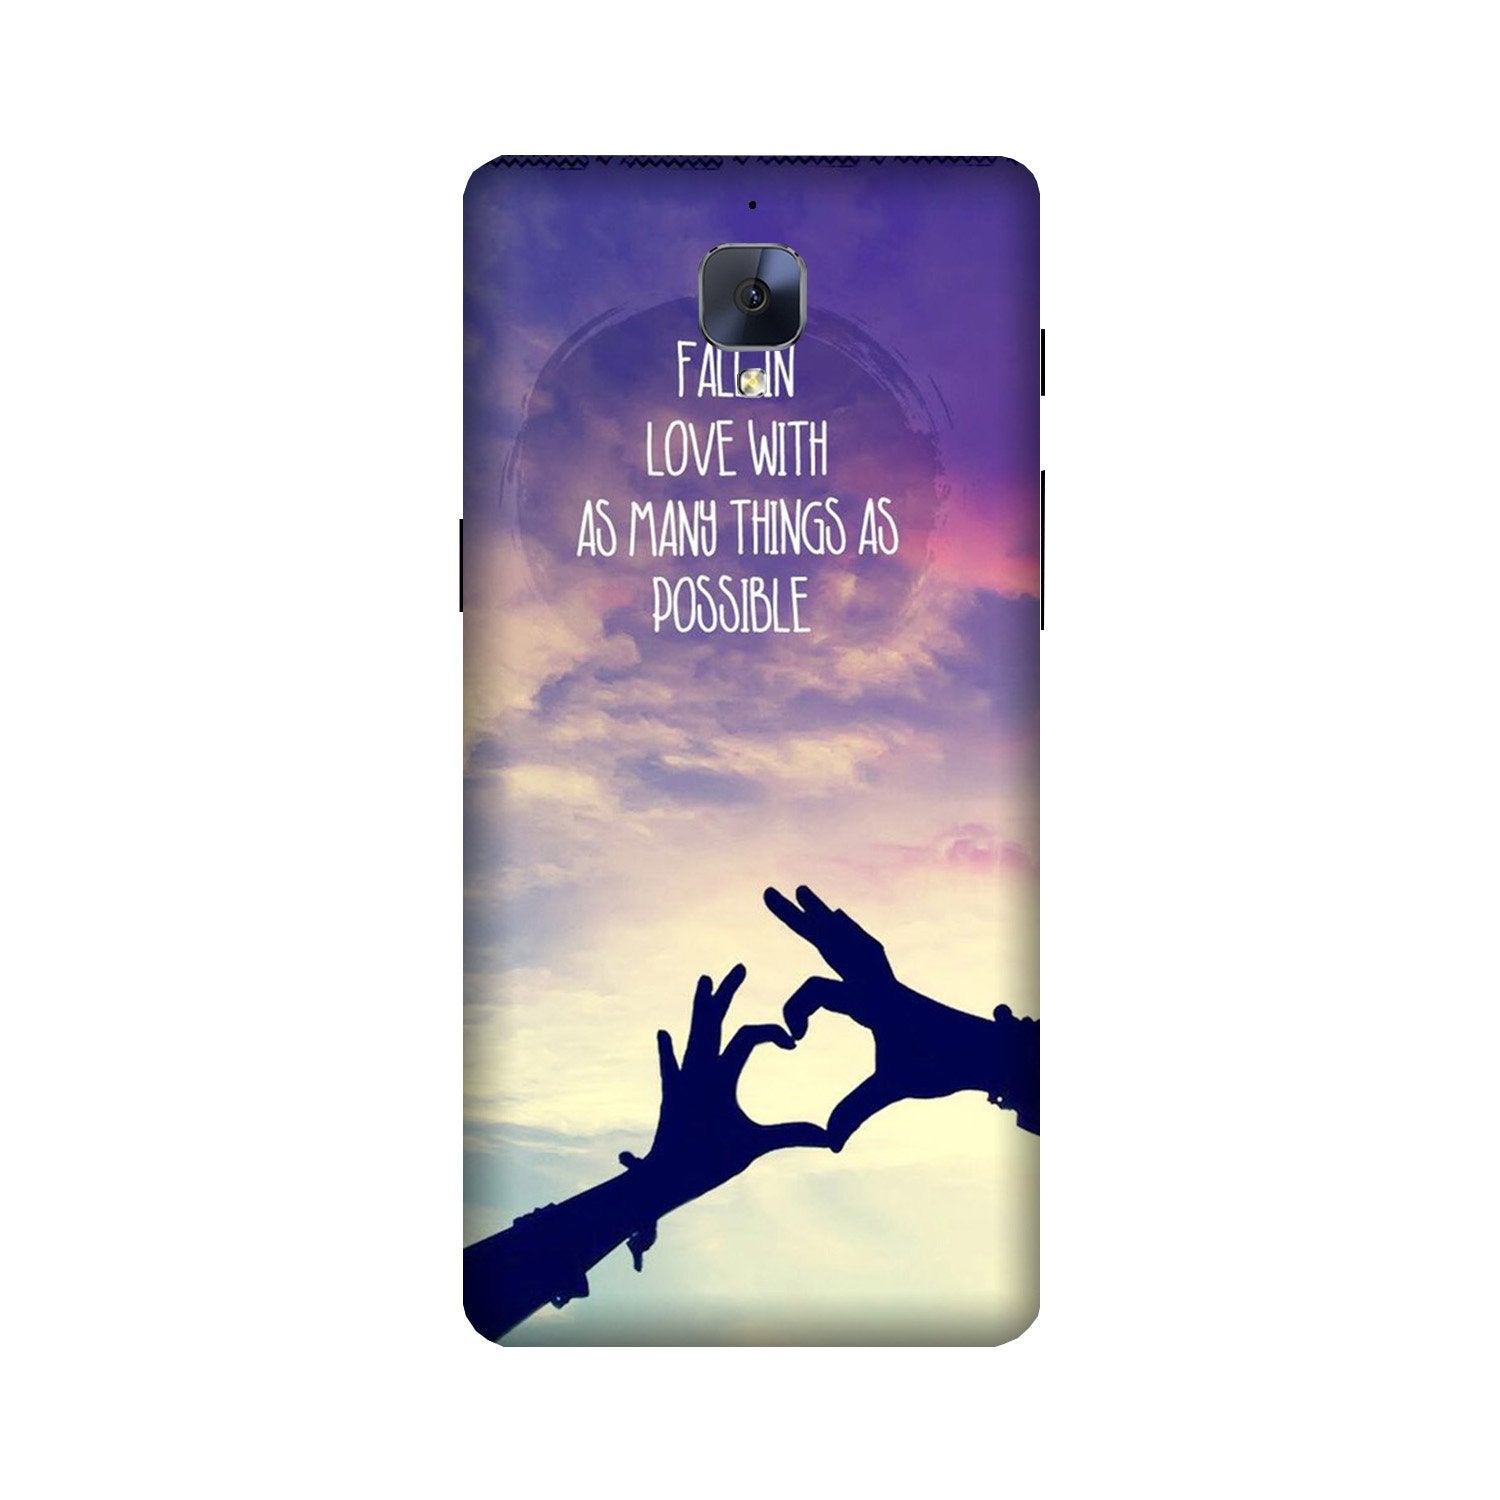 Fall in love Case for OnePlus 3/ 3T